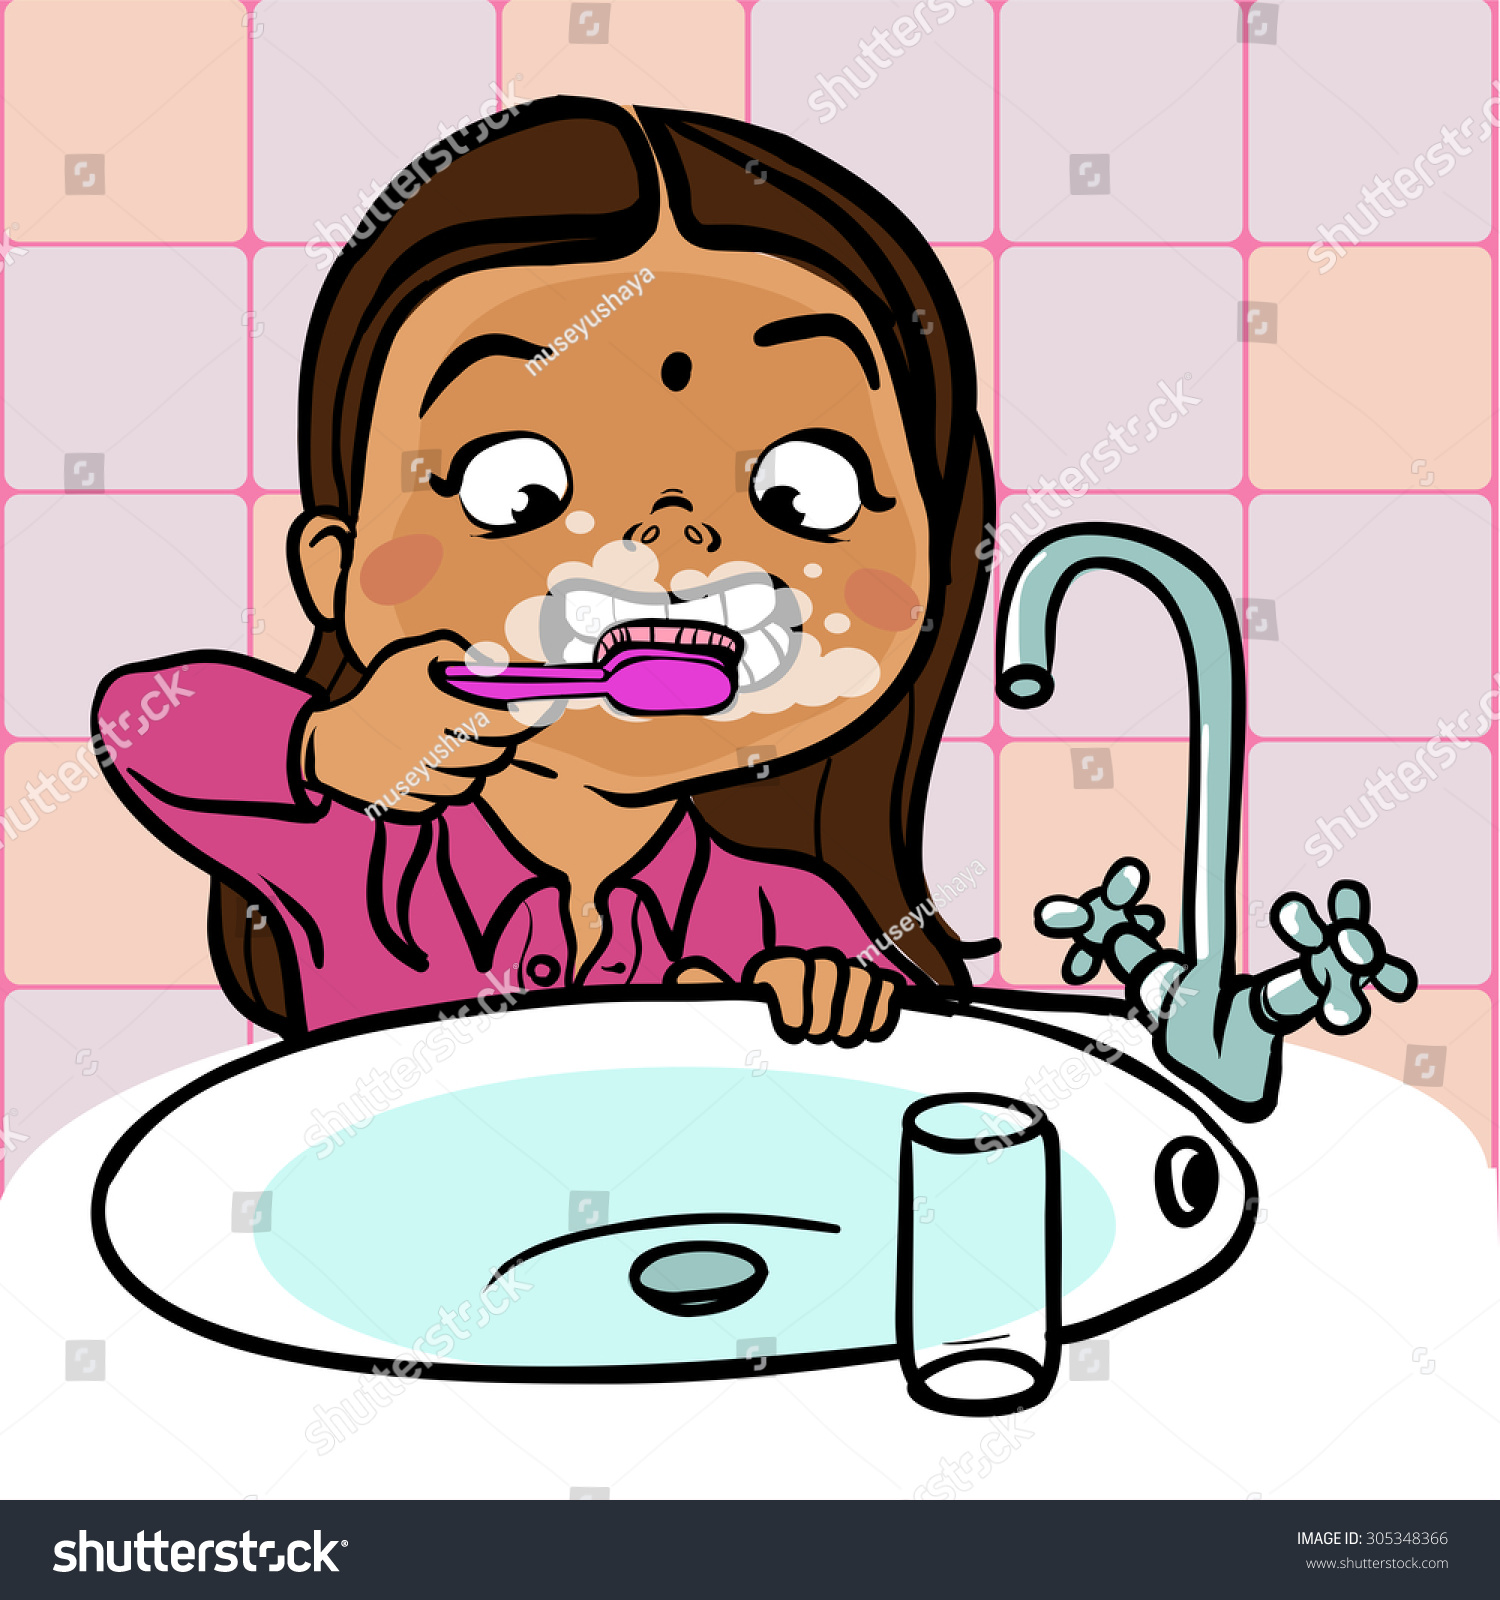 Brushing her teeth with limp images